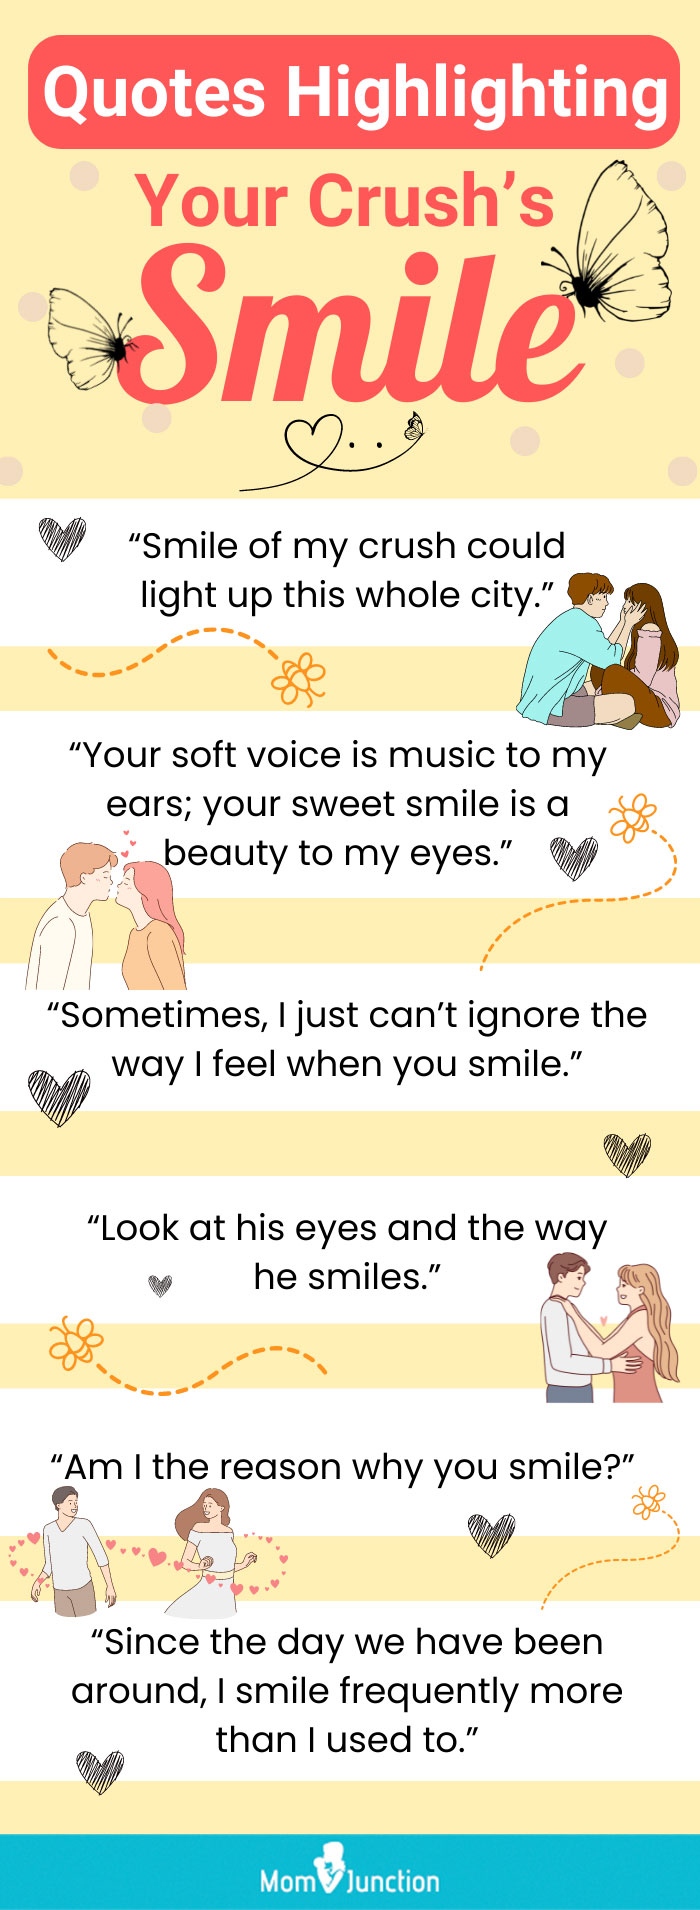 quotes about your crush smile (infographic)